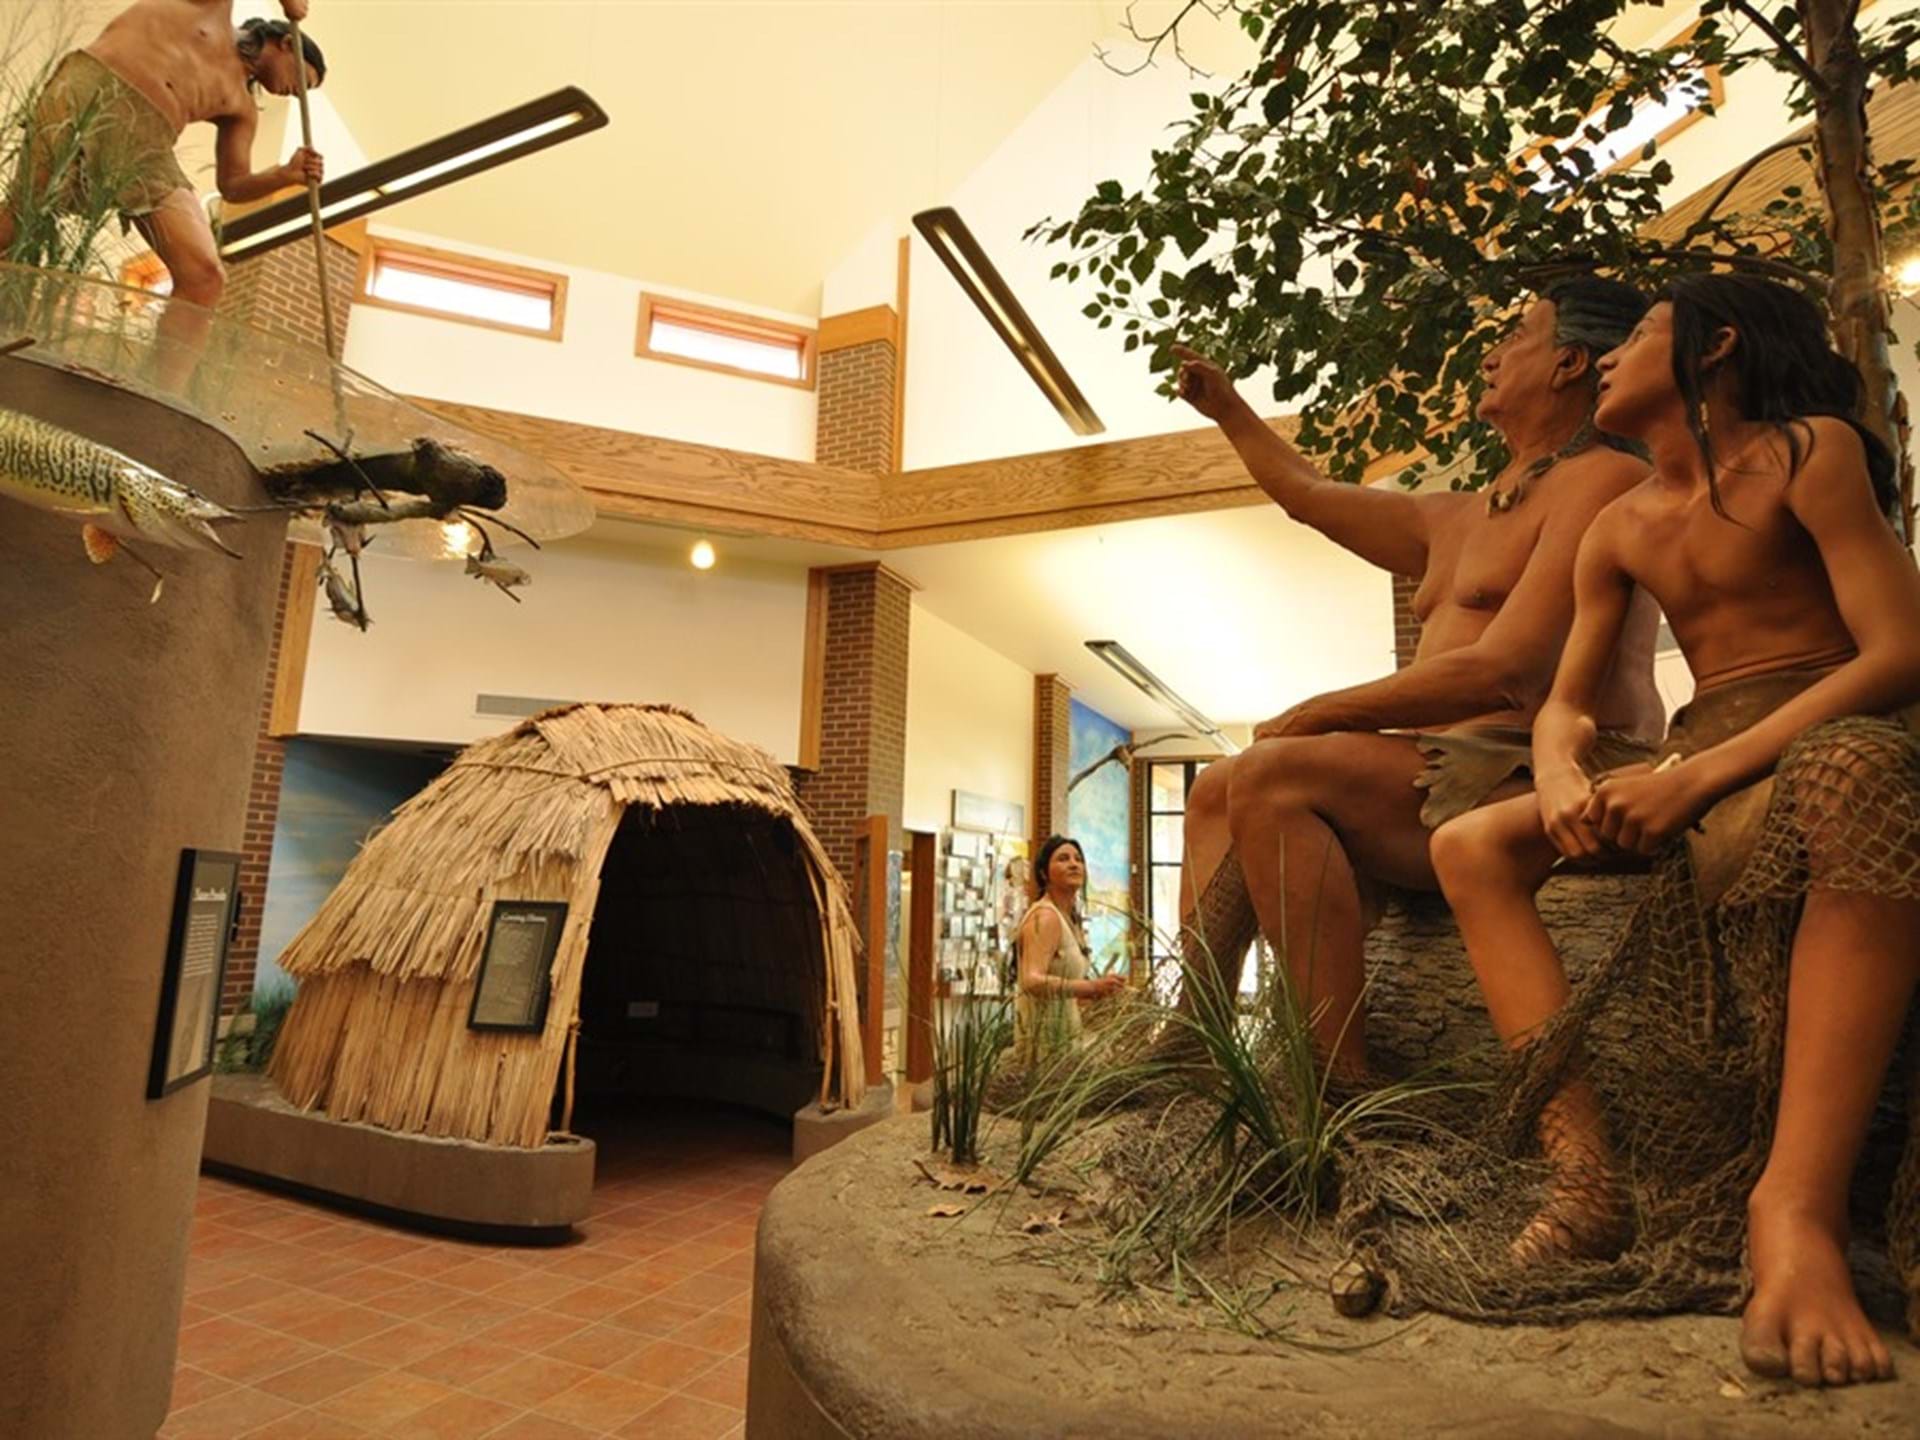 Exhibits feature Native American history, environmental education, and watersheds